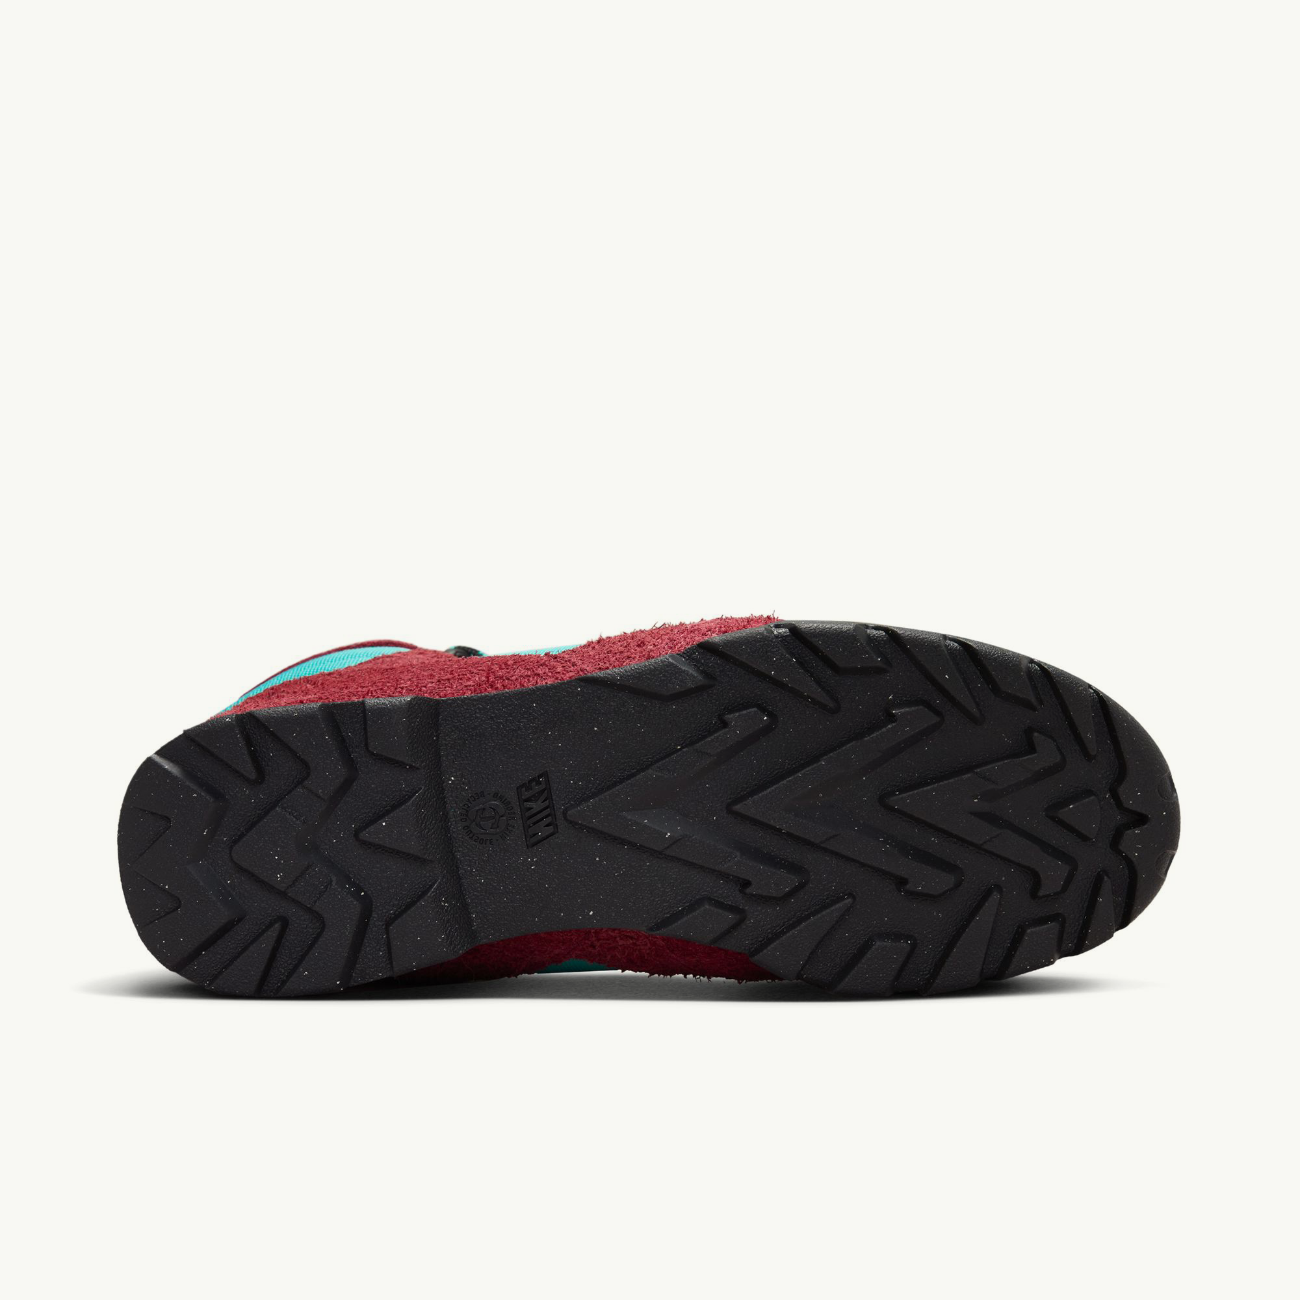 ACG Torre Mid - 'Team Red/Pinksicle'